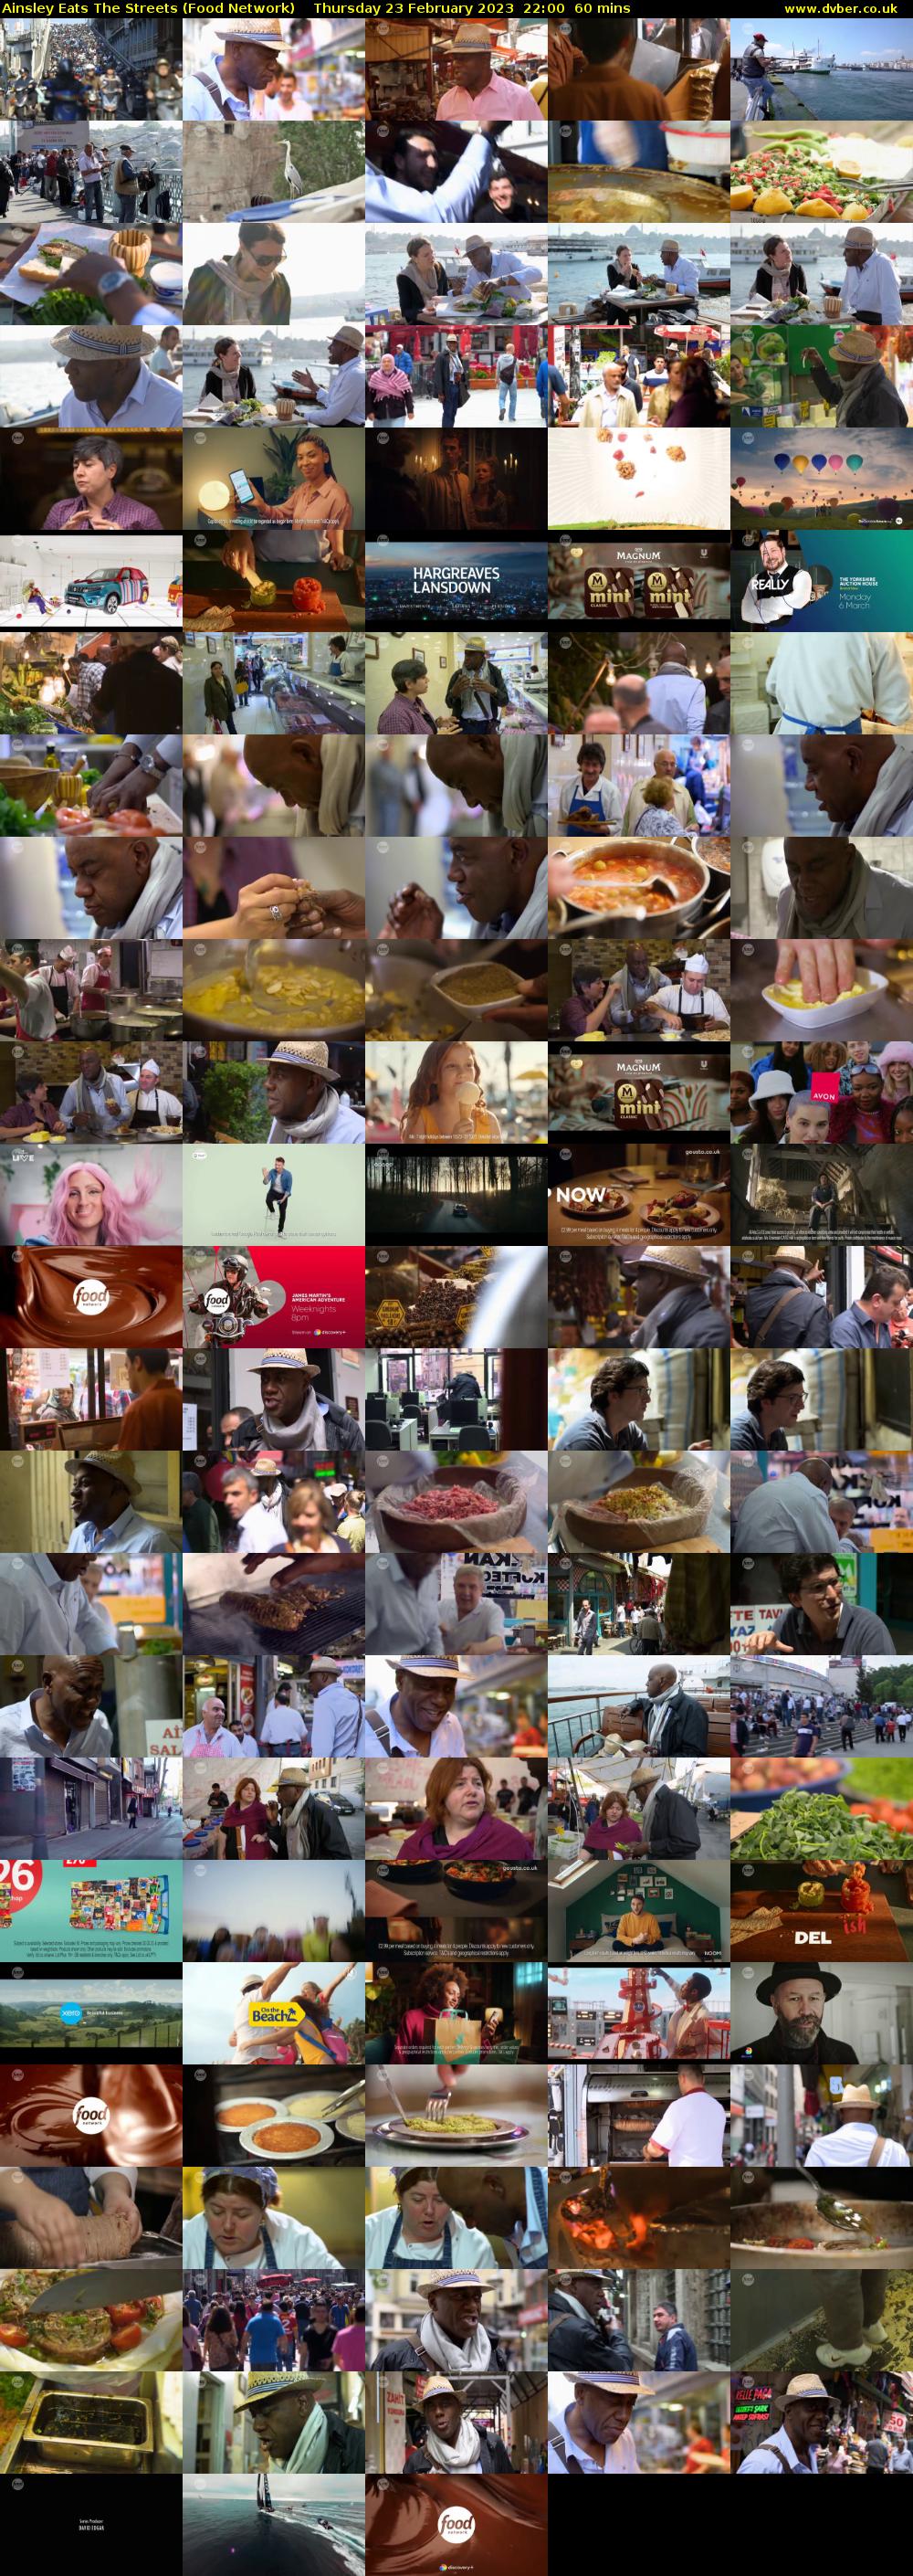 Ainsley Eats The Streets (Food Network) Thursday 23 February 2023 22:00 - 23:00